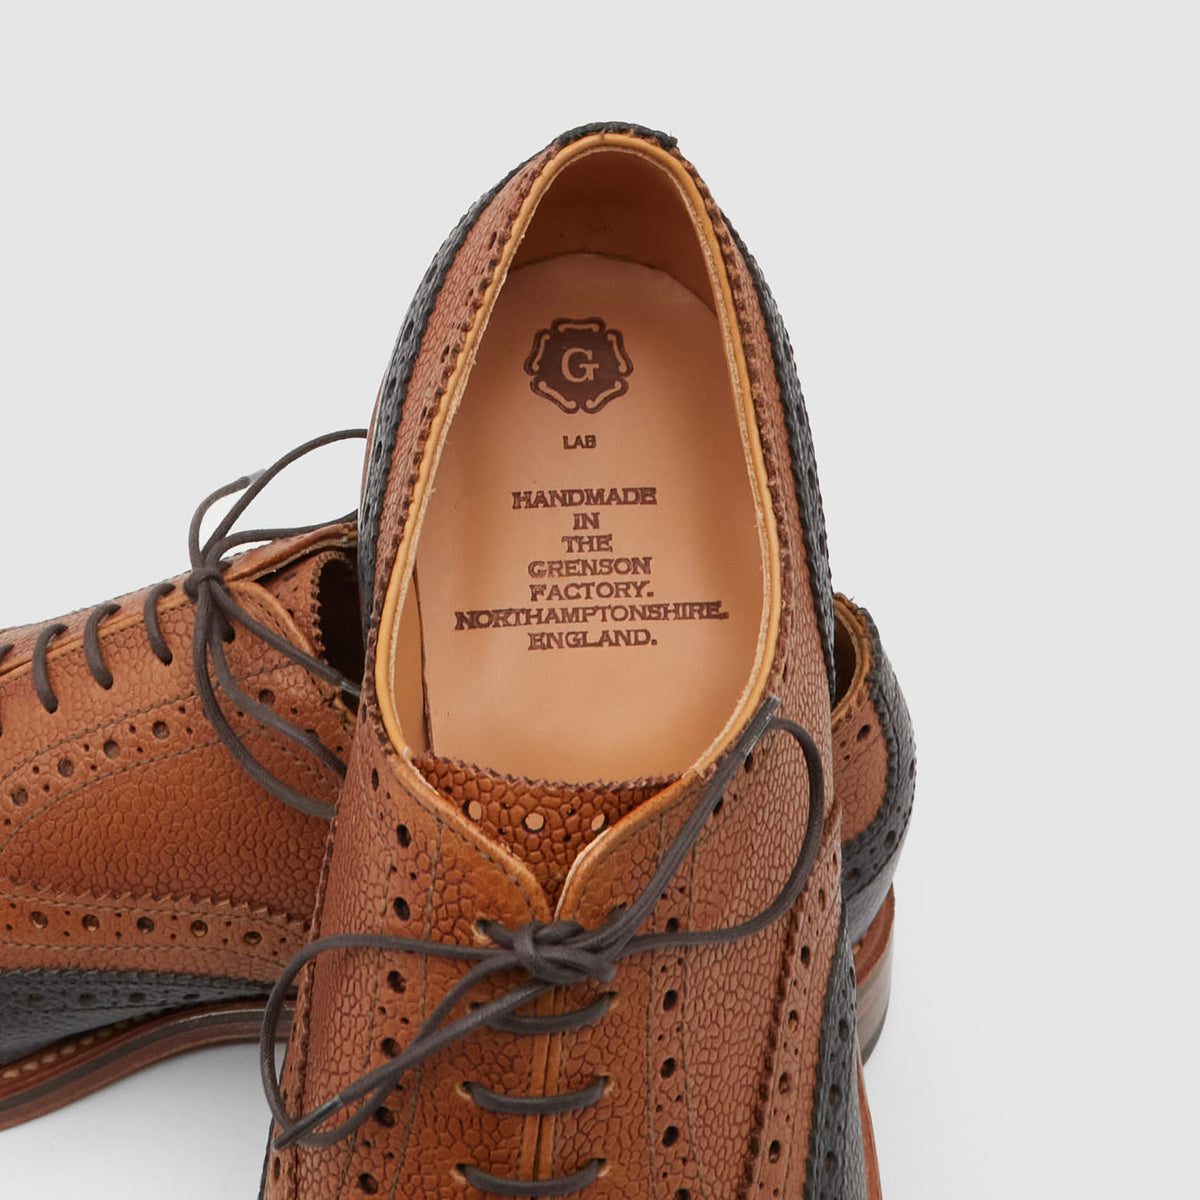 Grenson Wing Tip Brogue Shoes